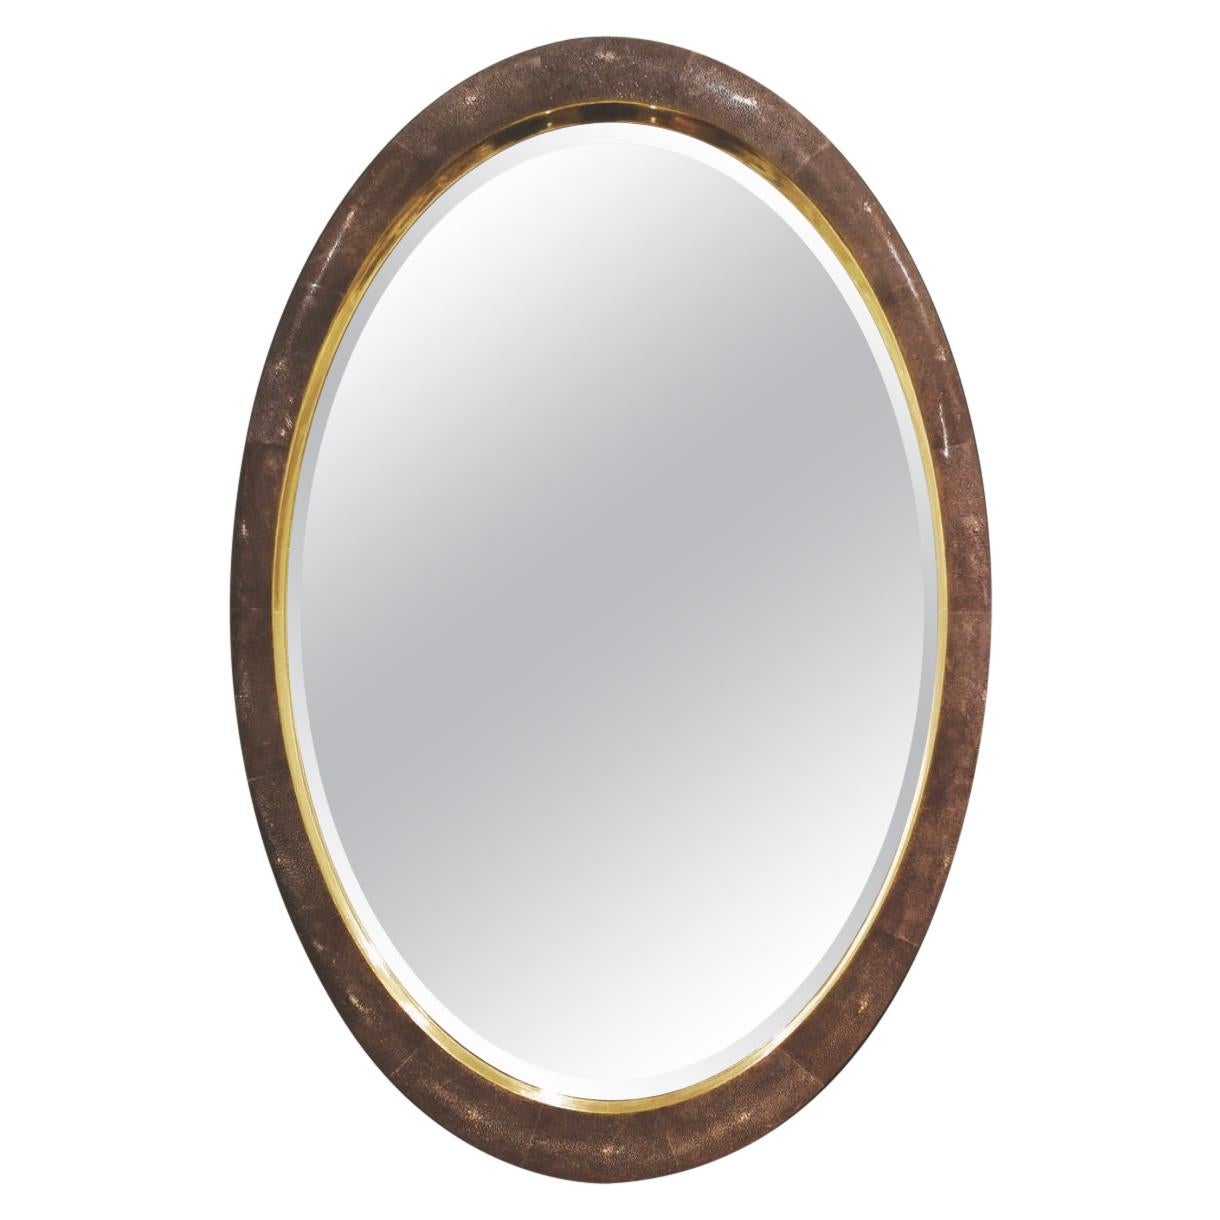 Ovi Mirror with Truffle Brown Shagreen Frame from Elan Atelier, 'in Stock' For Sale